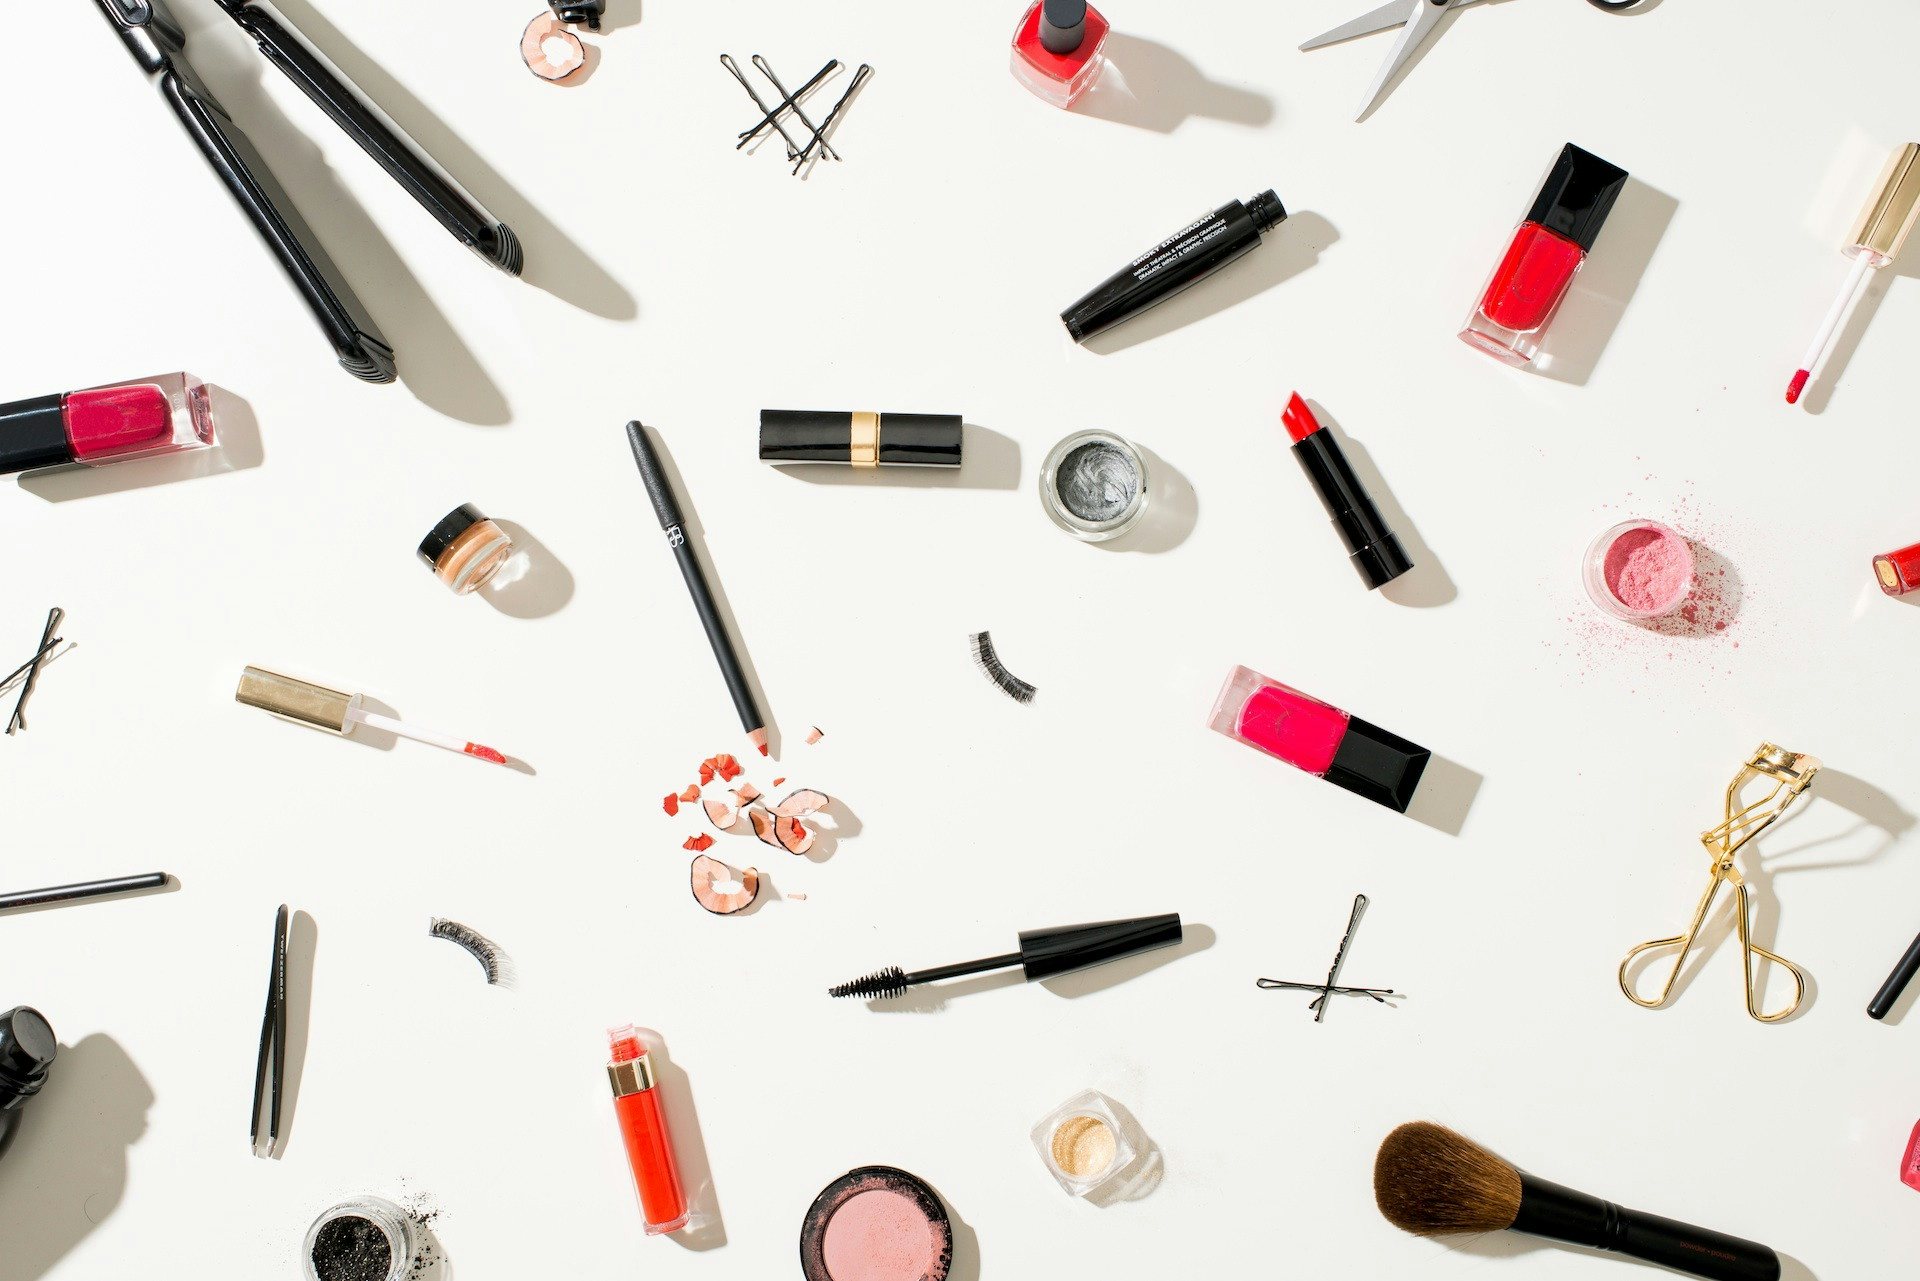 Chinese KOLs like to do marketing for luxury beauty brands for free because being associated with them will improve their image and increase their authority. Photo: Shutterstock